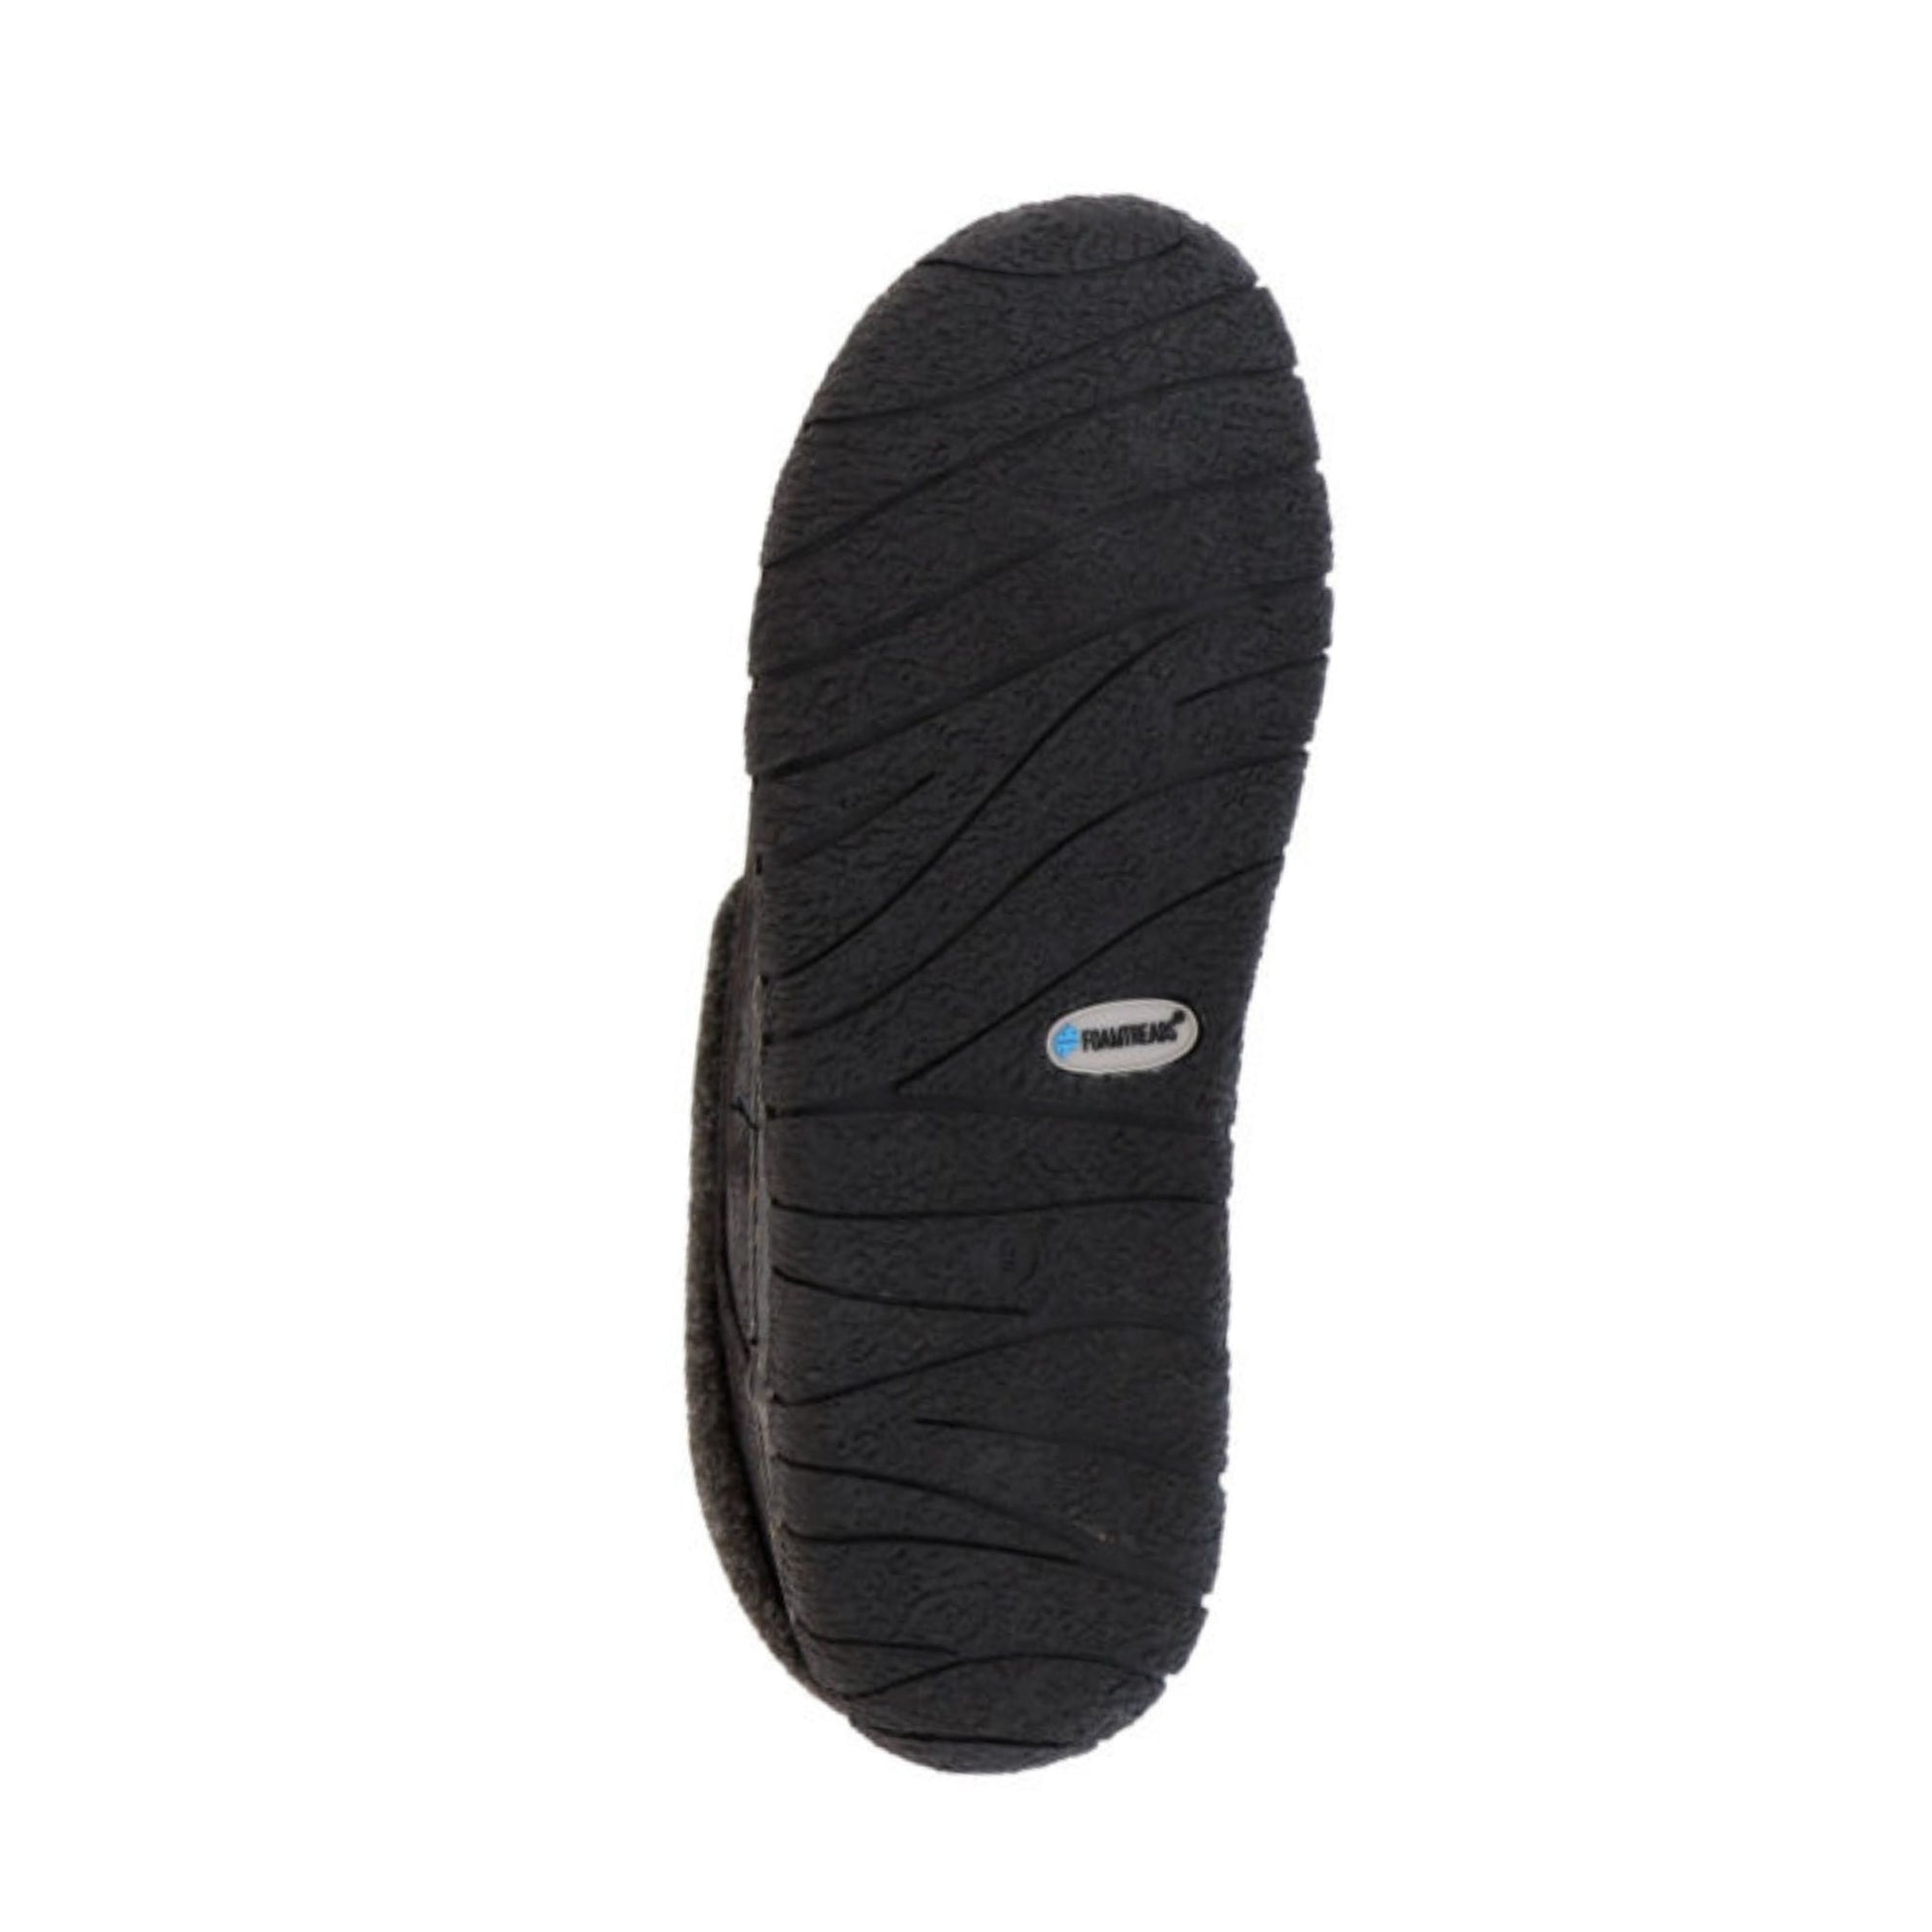 Black rubber outsole, textured for grip. 